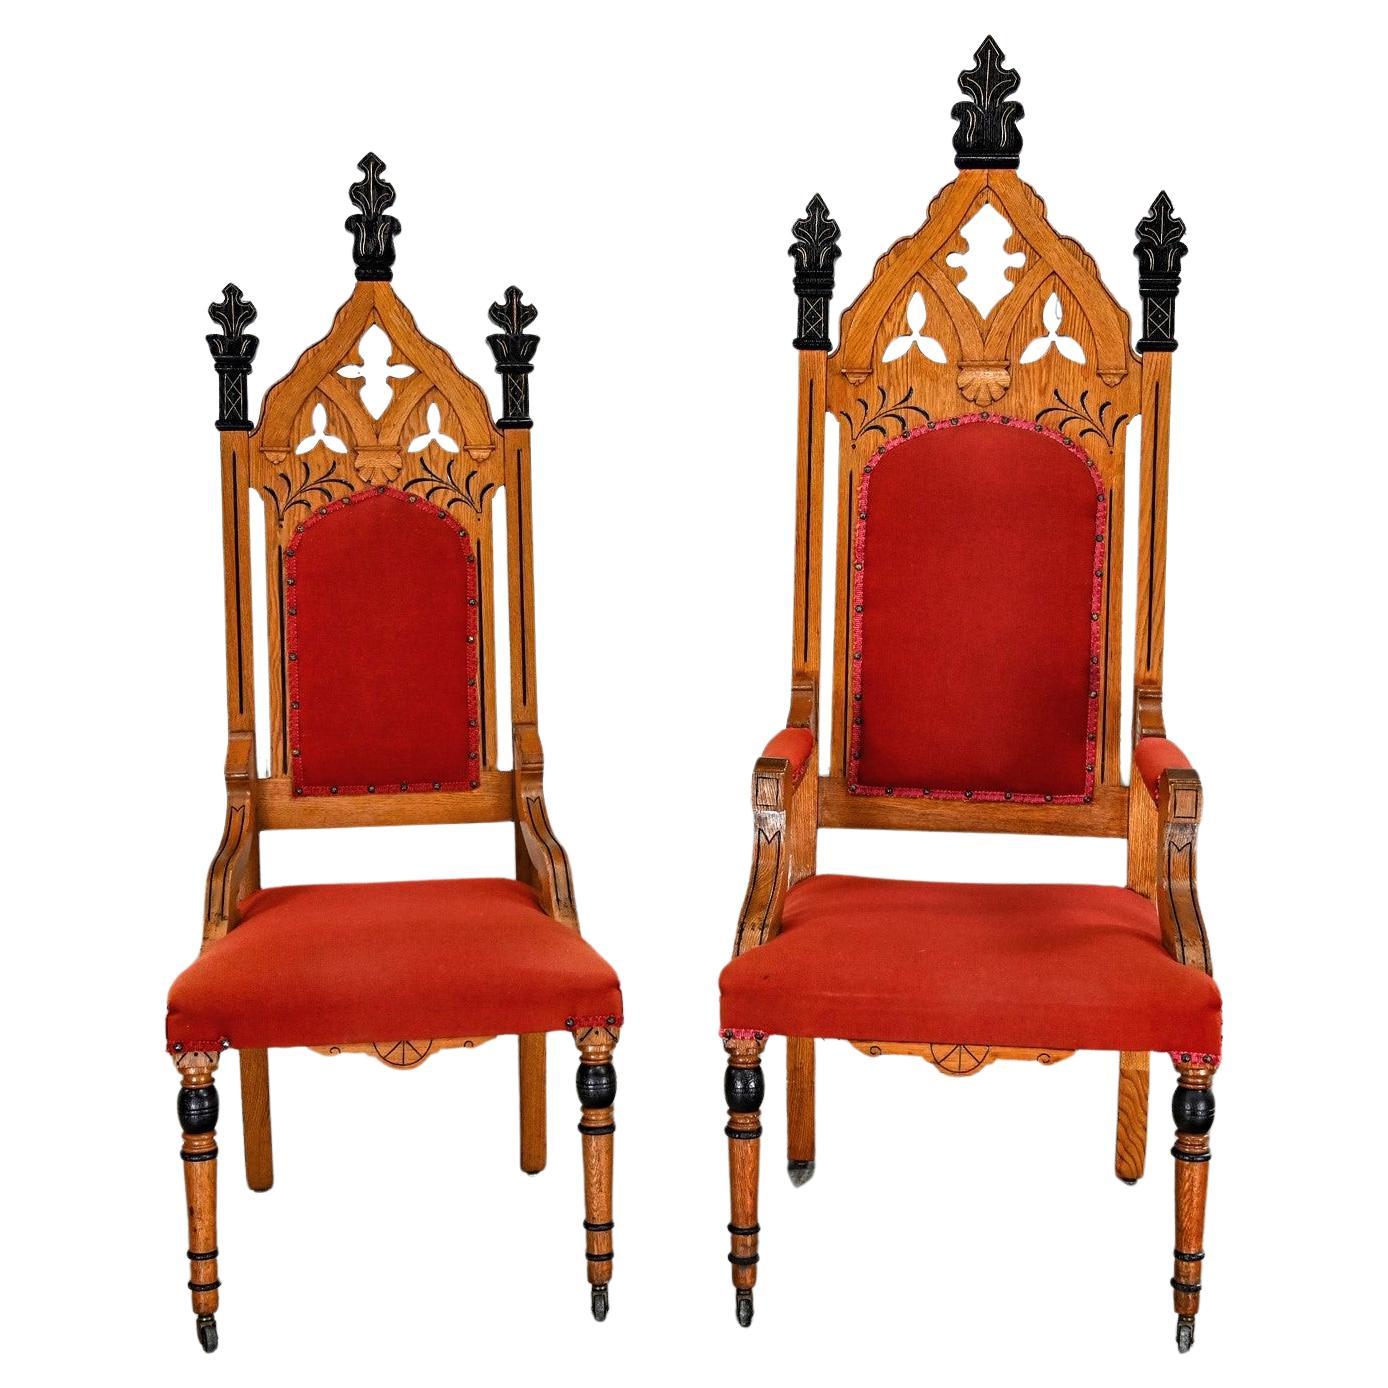 Oak Victorian or Gothic Revival Ecclesiastical His & Hers Throne Chairs a Pair For Sale